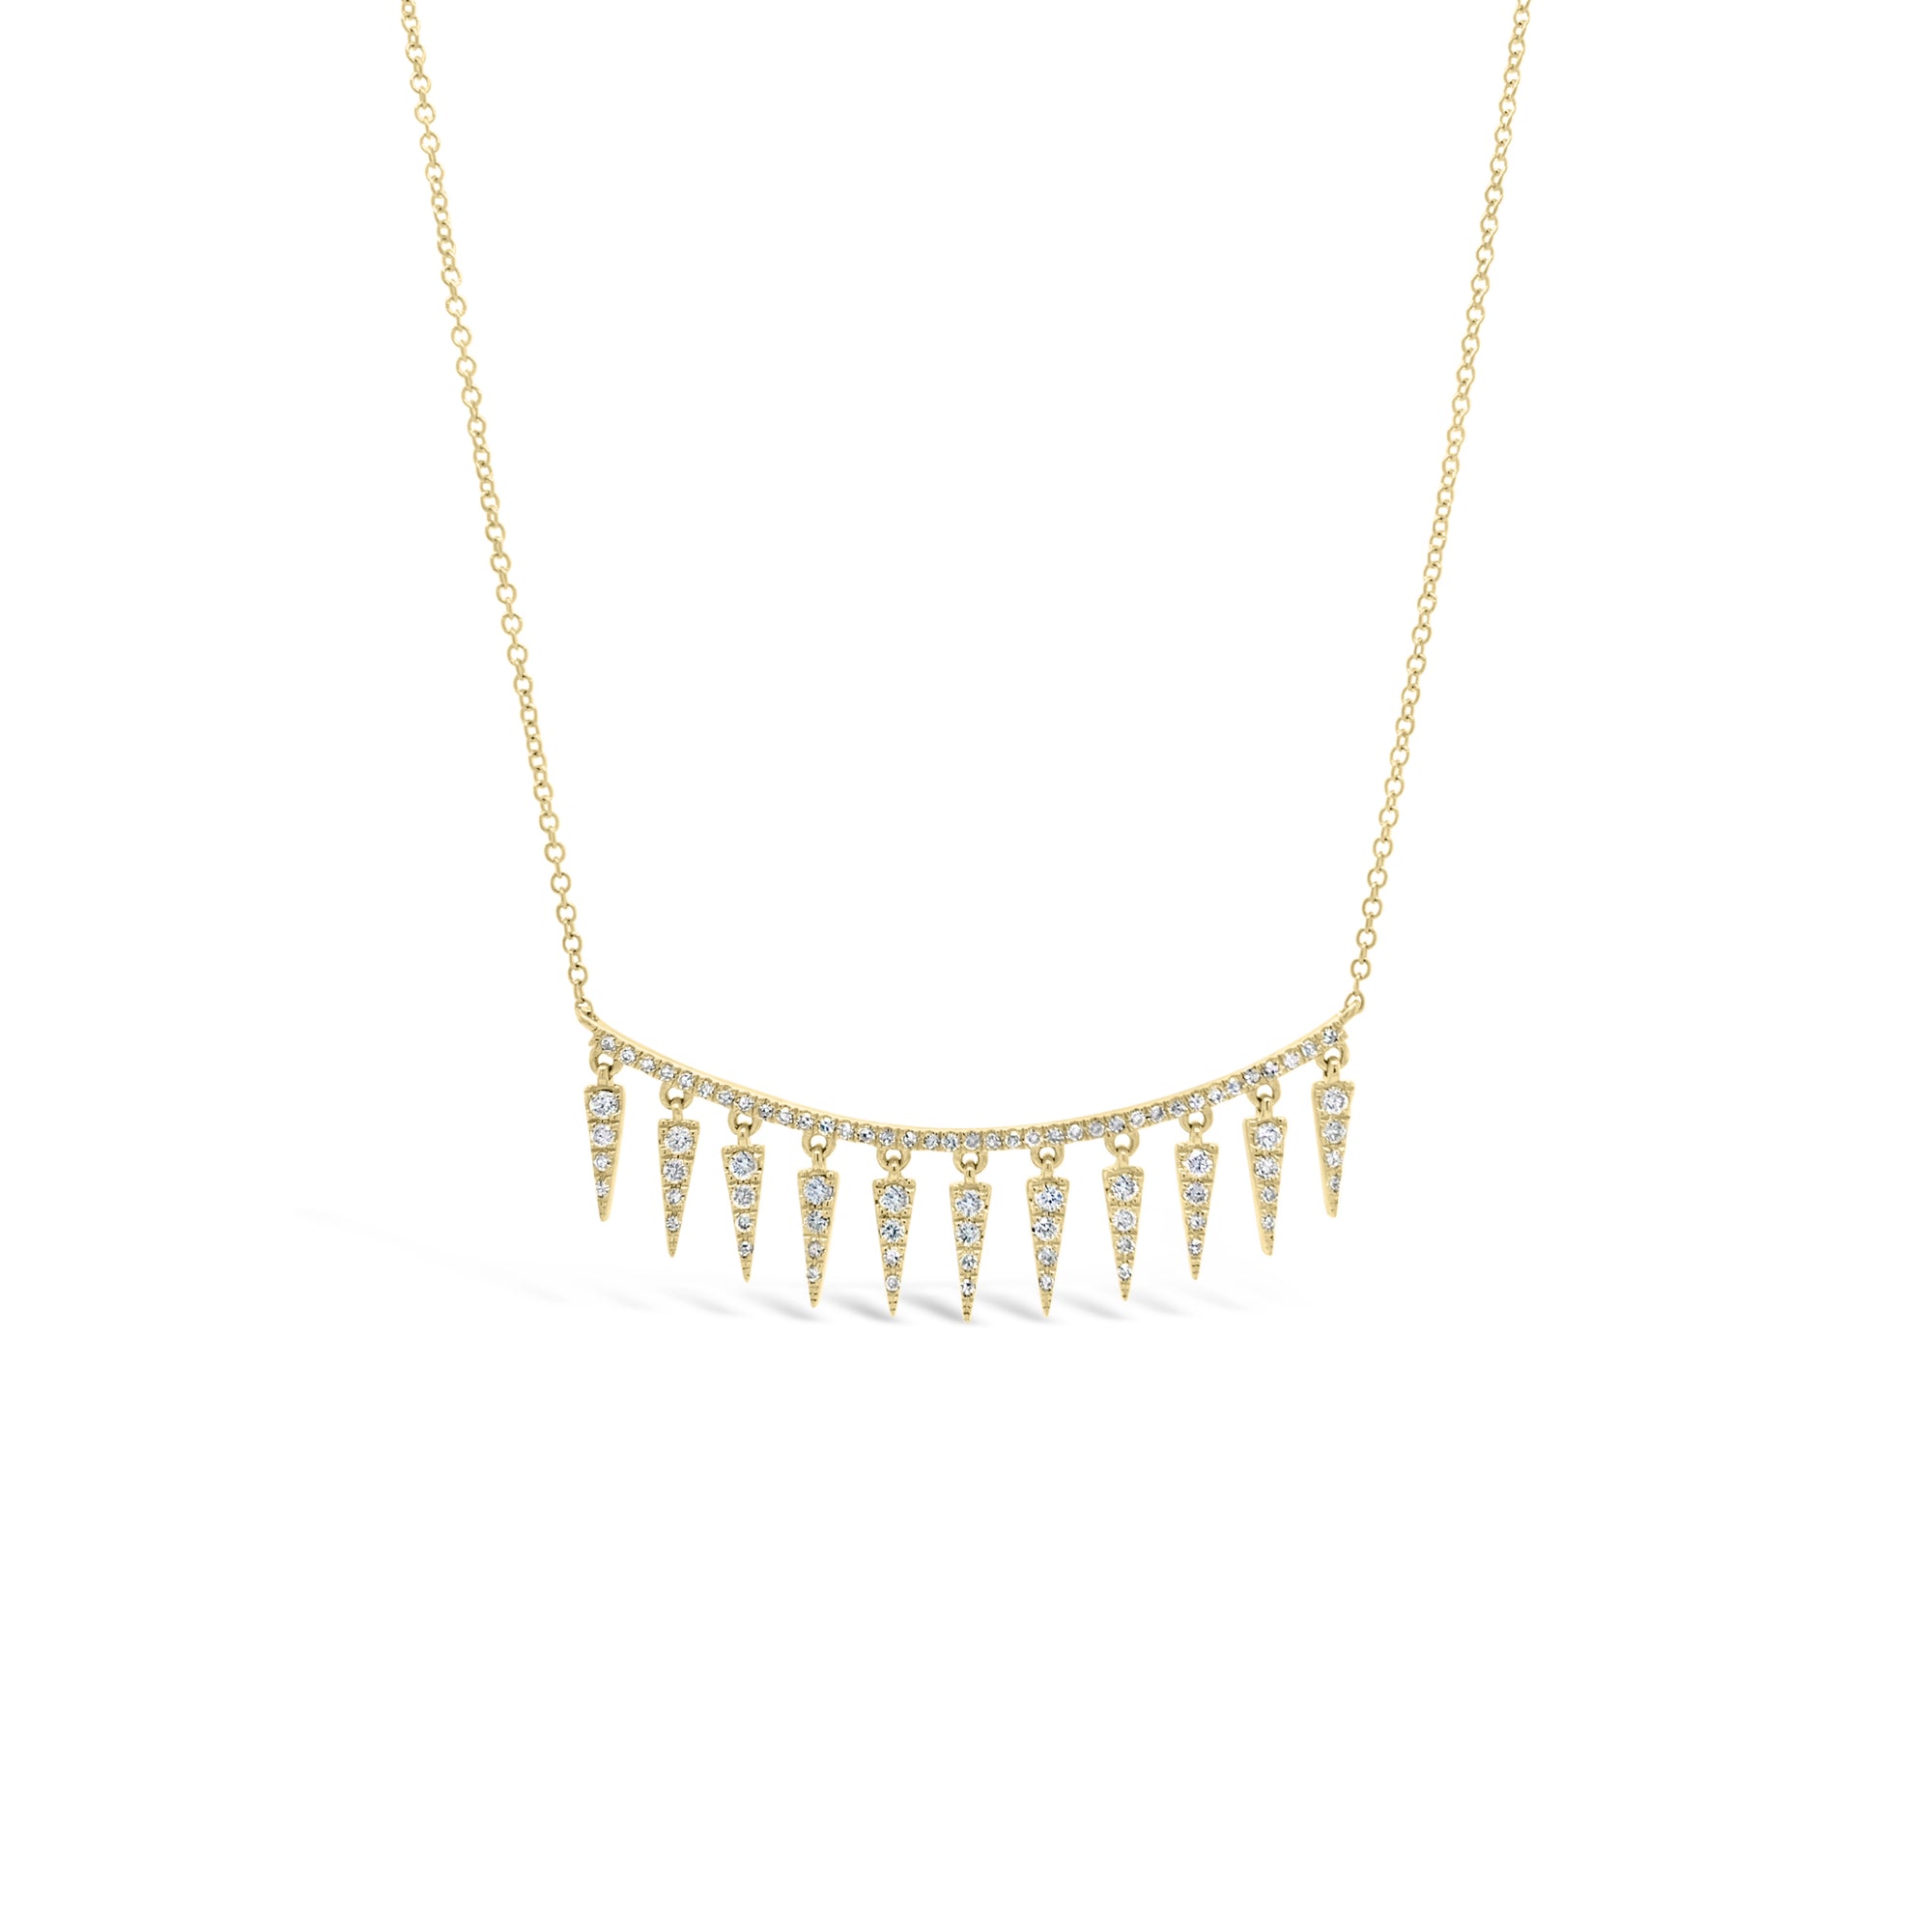 Diamond Spike Necklace Bar   -14K gold weighing 2.95 grams  -81 round diamonds totaling 0.38 carats